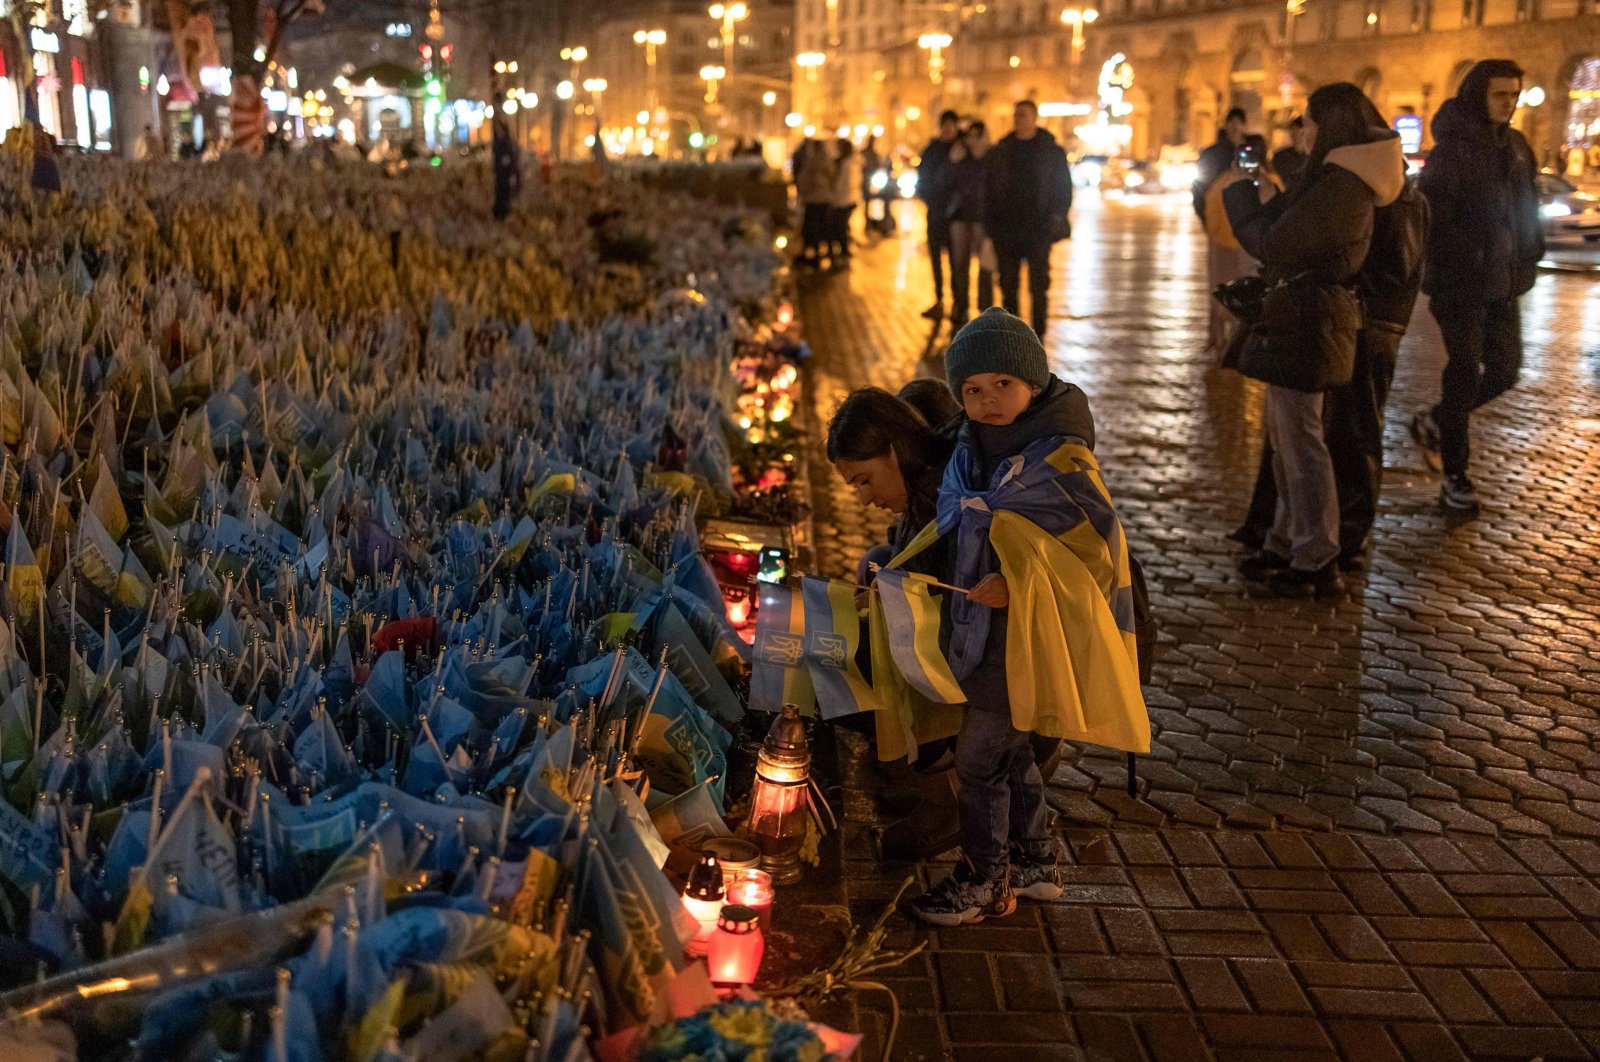 A woman and children place flags for friends in the Ukrainian military, in the area decked with flags bearing the symbols and colors of Ukraine, as the nation commemorates fallen Ukrainian army soldiers at Independence Square in Kyiv, on Feb. 24, 2024. (AFP Photo)